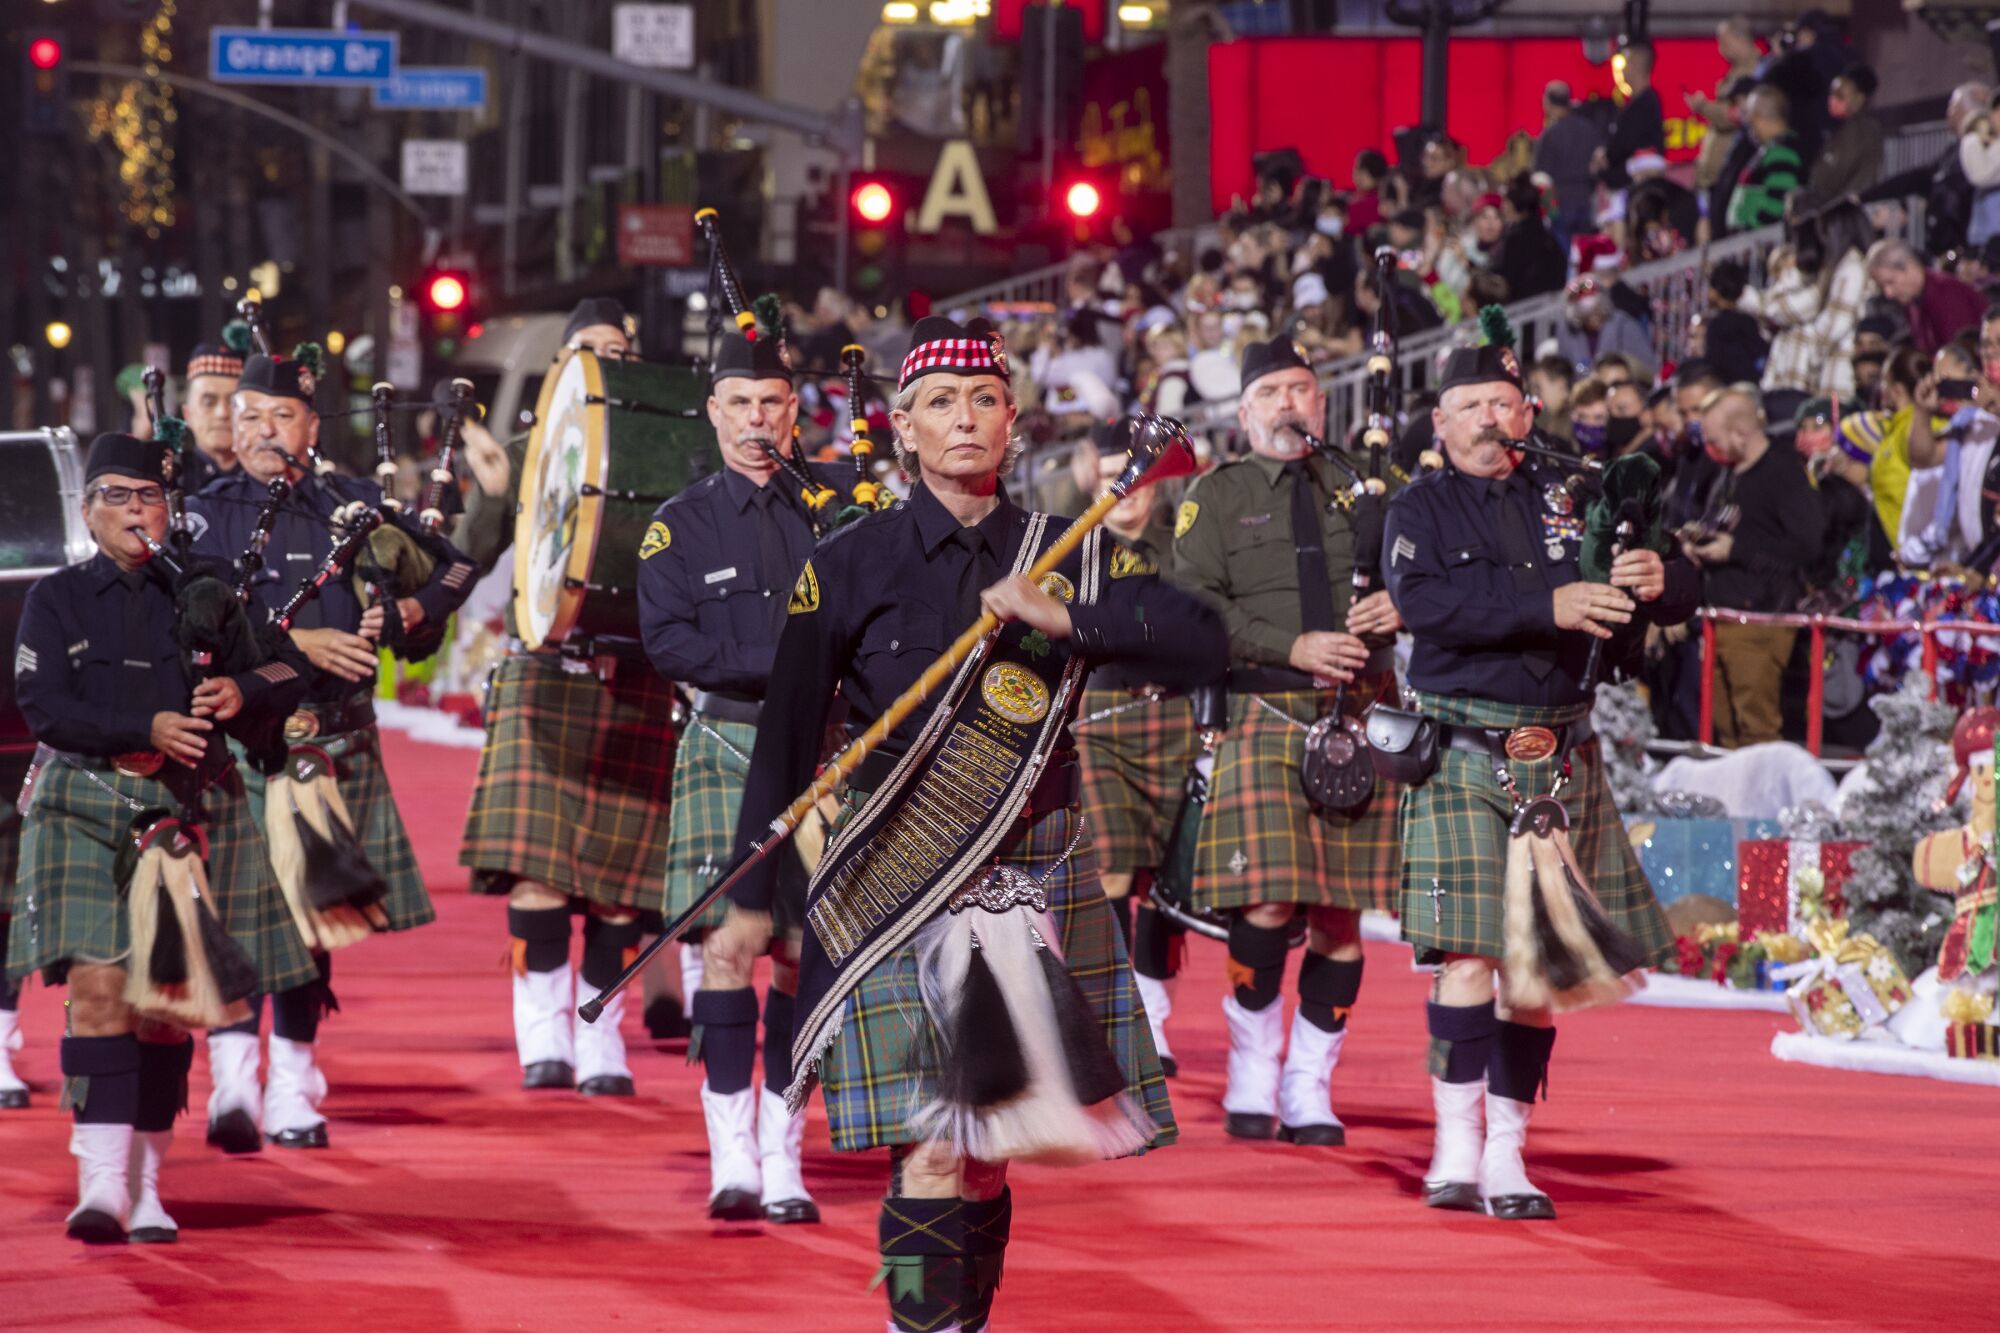 Los Angeles Police Emerald Society Pipes and Drums march on the red carpet